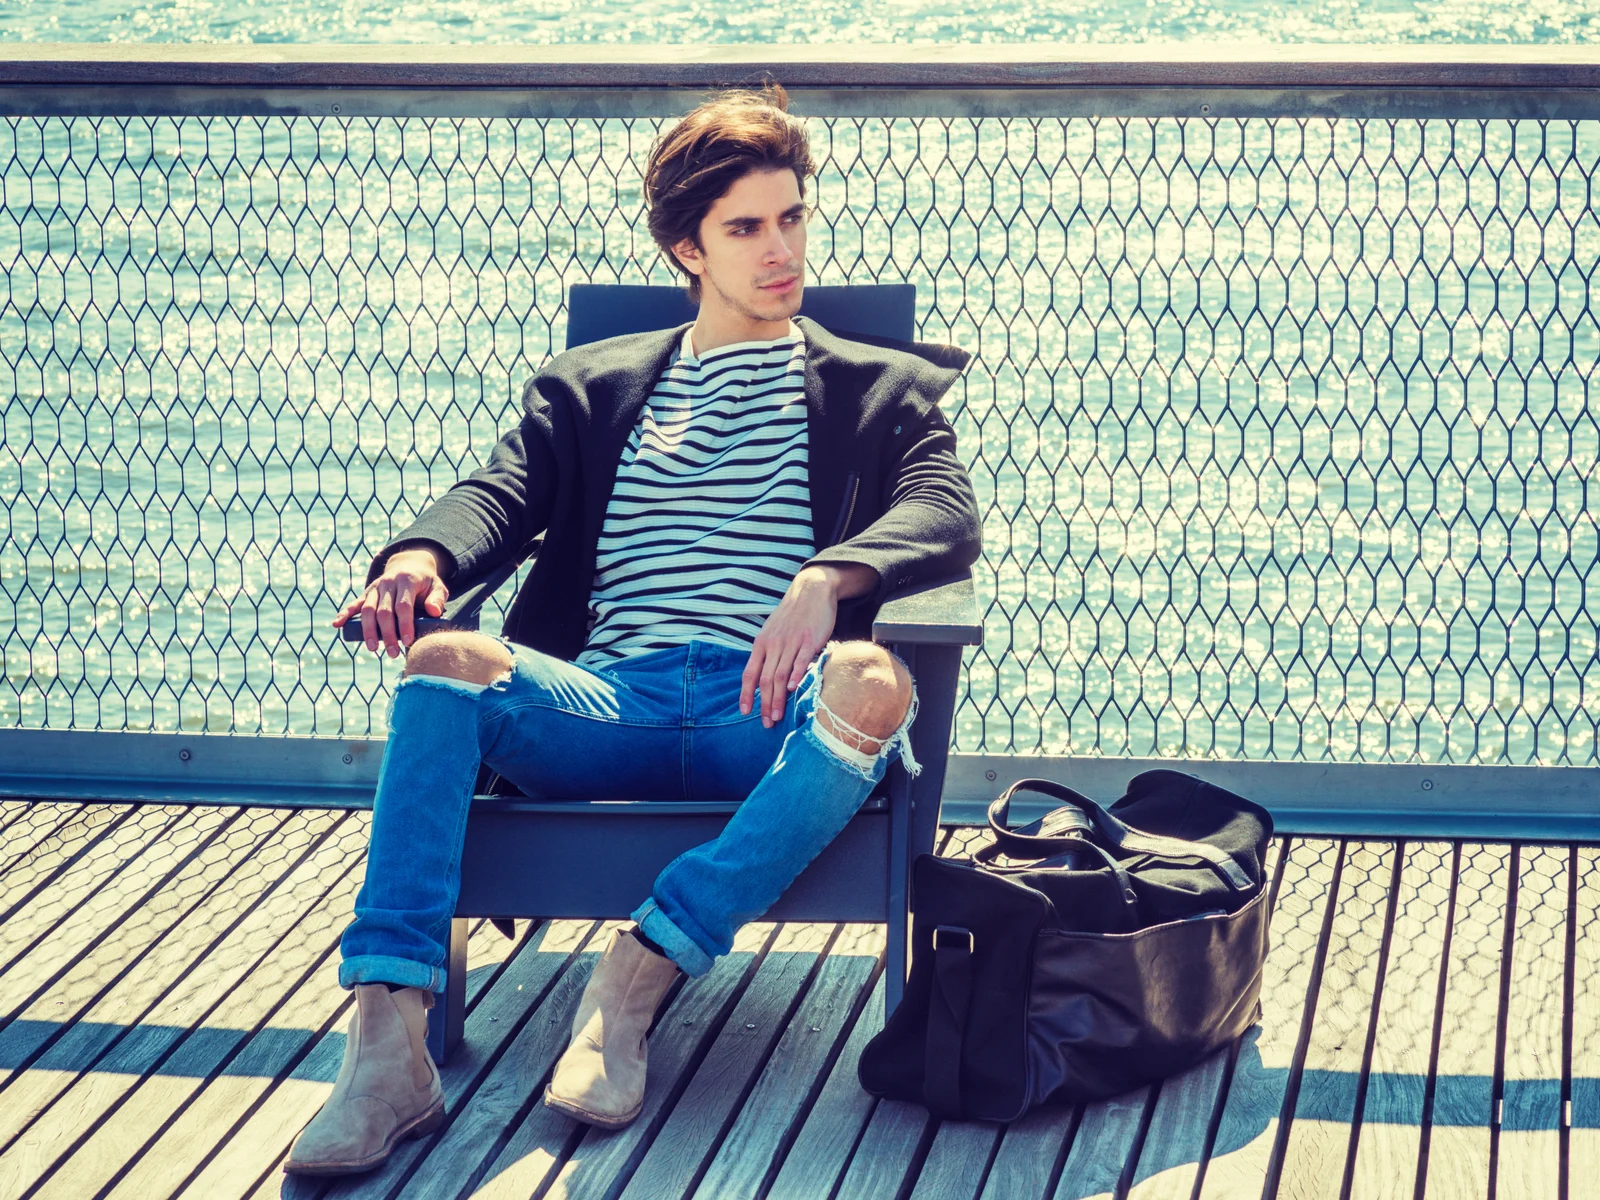 Stylish young man with ripped skinny jeans and a black men's leather weekender bag looking seriously to his left while sitting on a dock